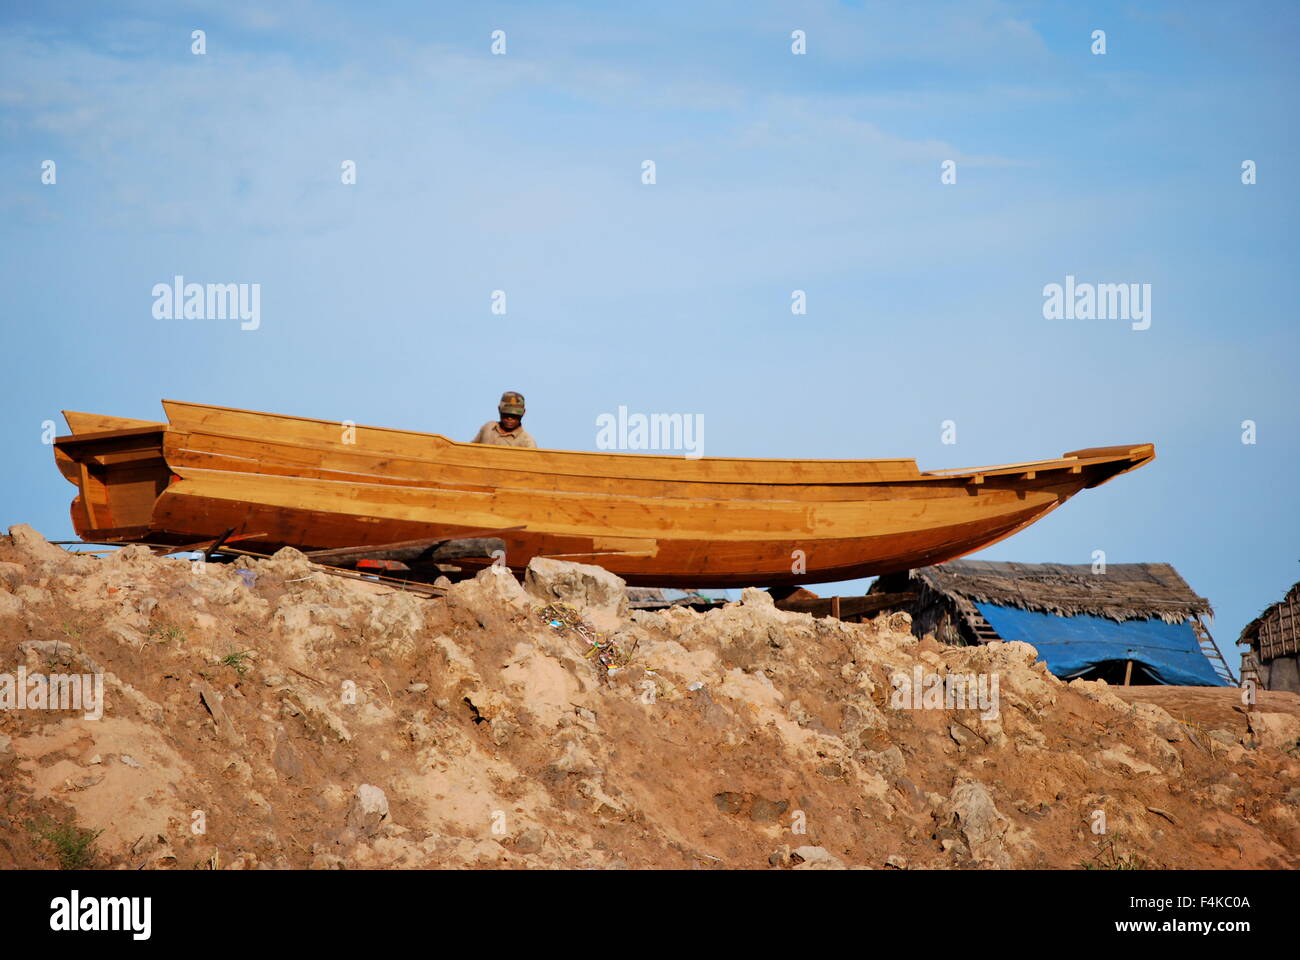 Small fishing boat out of the water at the Floating Villages on Tonle Sap River, Cambodia Stock Photo